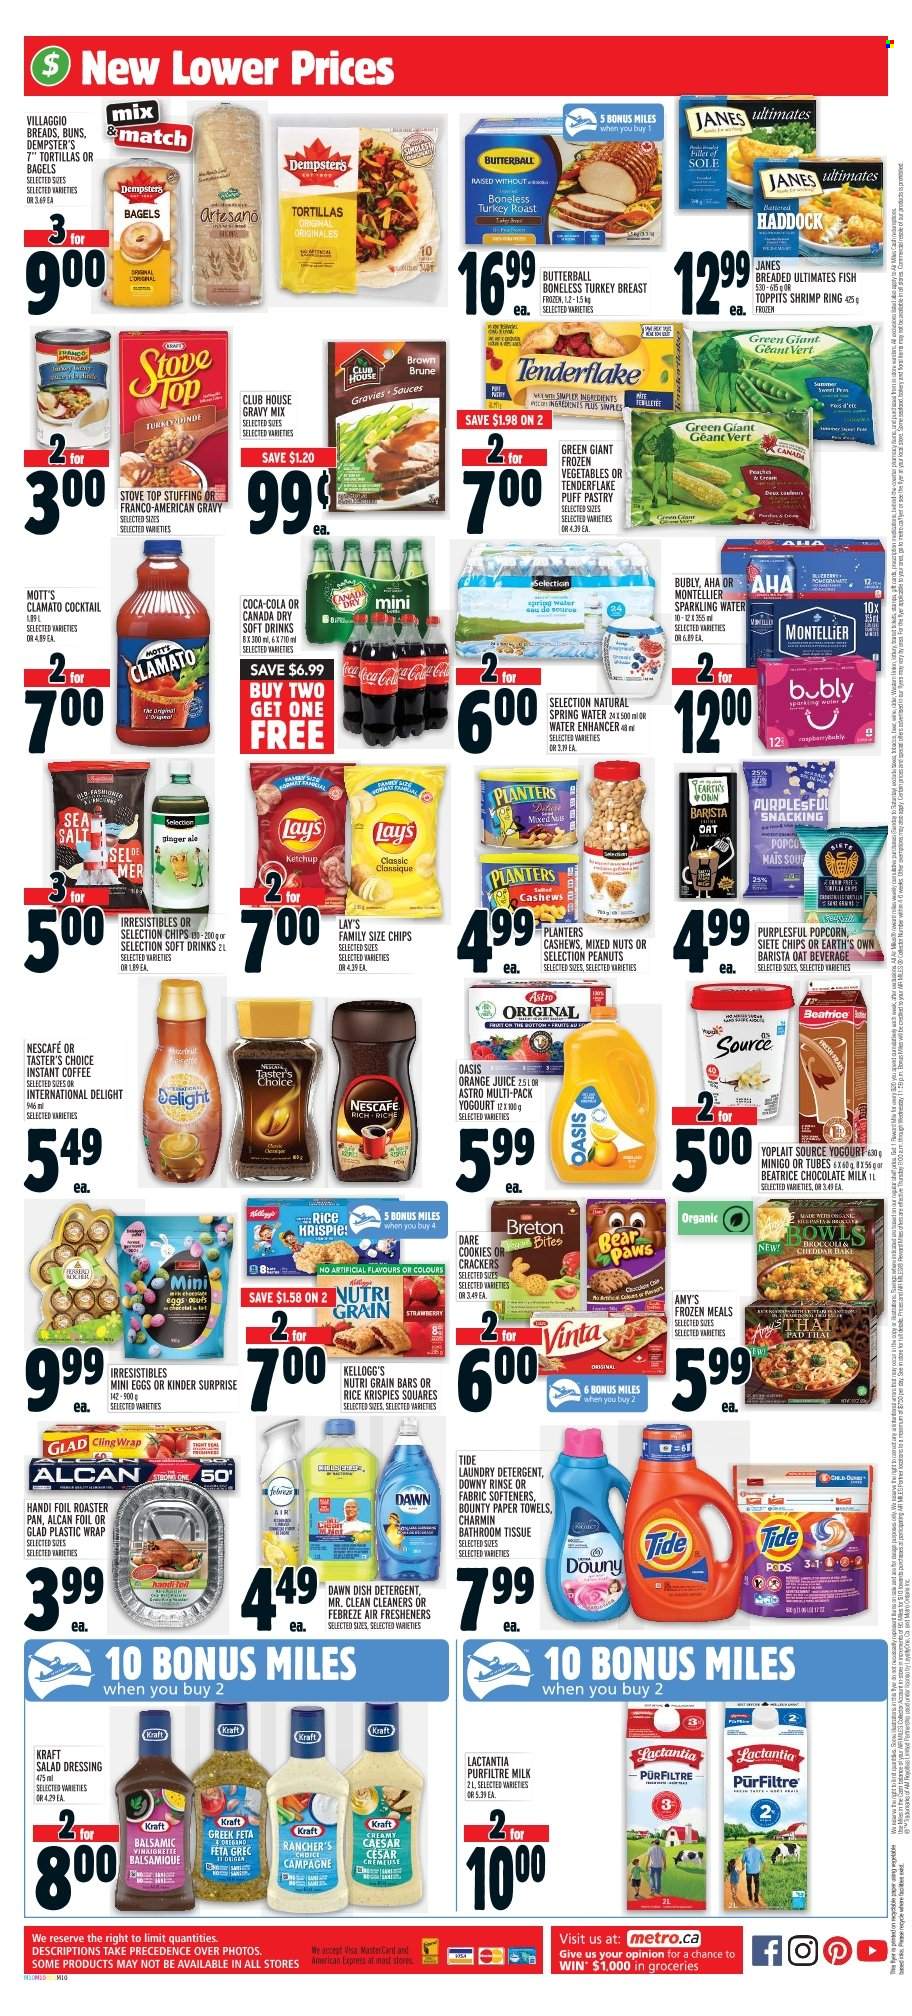 thumbnail - Metro Flyer - March 30, 2023 - April 05, 2023 - Sales products - bagels, tortillas, buns, peaches, Mott's, haddock, fish, shrimps, Kraft®, turkey roast, roast, Butterball, cheese, feta, Yoplait, milk, cookies, milk chocolate, Bounty, Kinder Surprise, crackers, Kellogg's, Lay’s, popcorn, oats, Rice Krispies, Nutri-Grain, gravy mix, salad dressing, vinaigrette dressing, dressing, cashews, peanuts, mixed nuts, Planters, Canada Dry, Coca-Cola, ginger ale, orange juice, juice, Clamato, soft drink, spring water, sparkling water, water, coffee, instant coffee, turkey breast, turkey, bath tissue, kitchen towels, paper towels, Charmin, Febreze, Tide, laundry detergent, dishwasher cleaner, pan, air freshener, Paws, detergent, ketchup, Nescafé. Page 2.